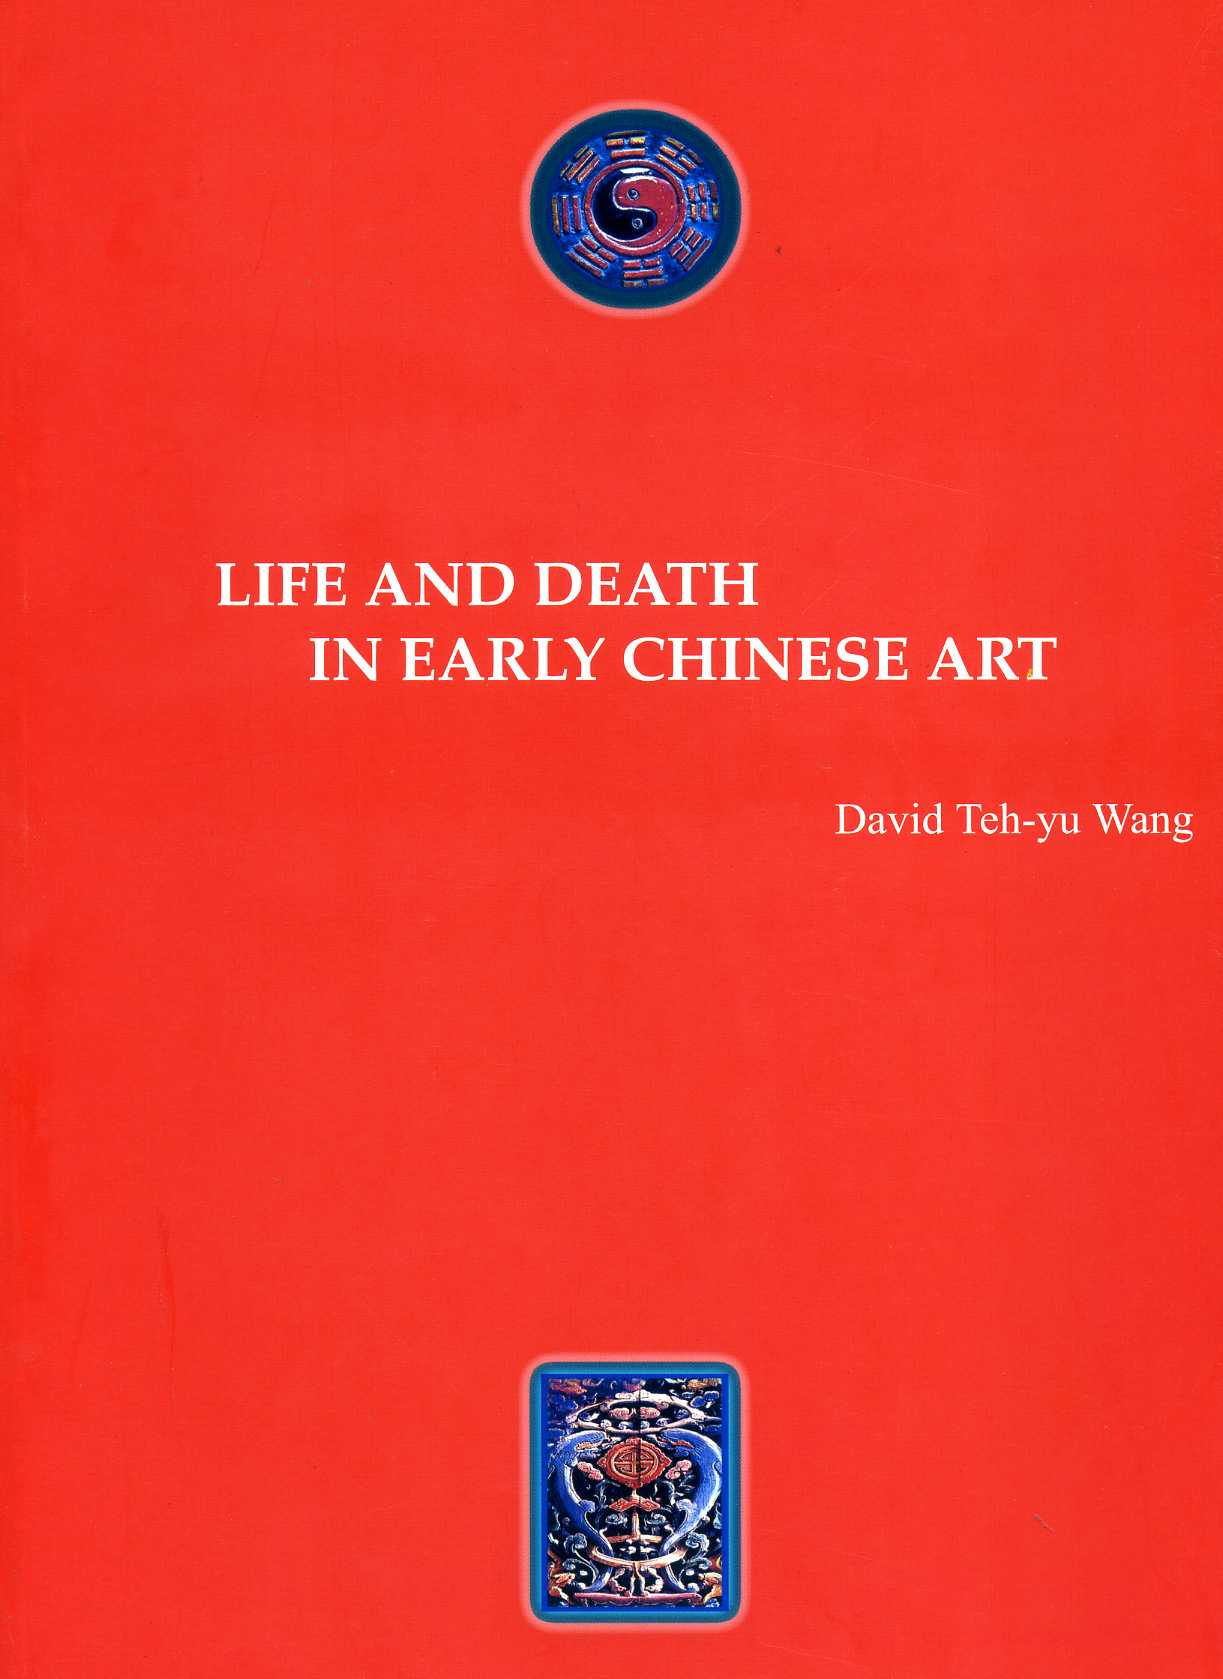 LIFE AND DEATH IN EARLY CHINESE ART